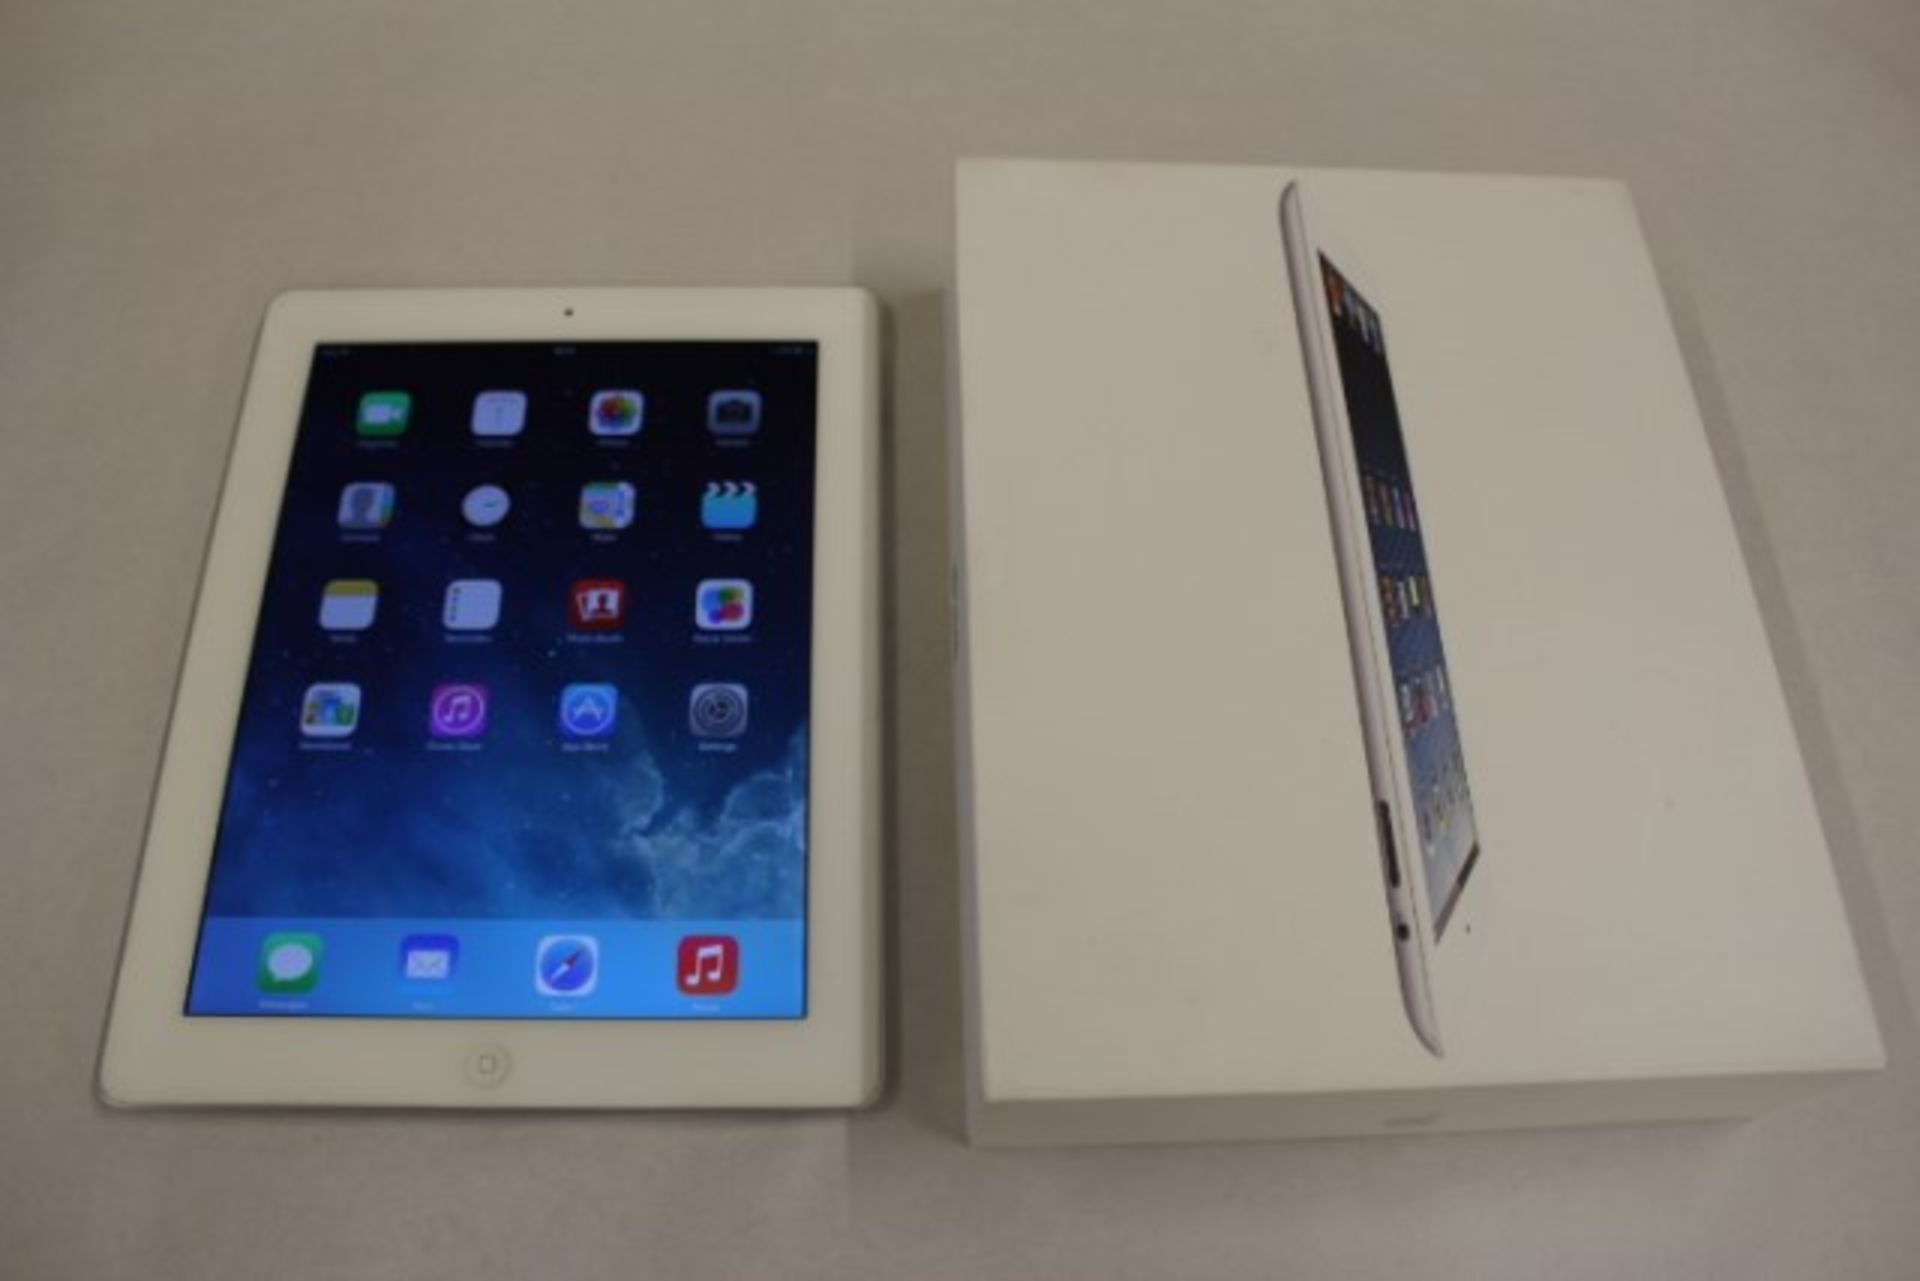 V  Grade A iPad 4 16Gb Black With Two Cameras/Retina Display With Charger In Original Box - - Image 4 of 4